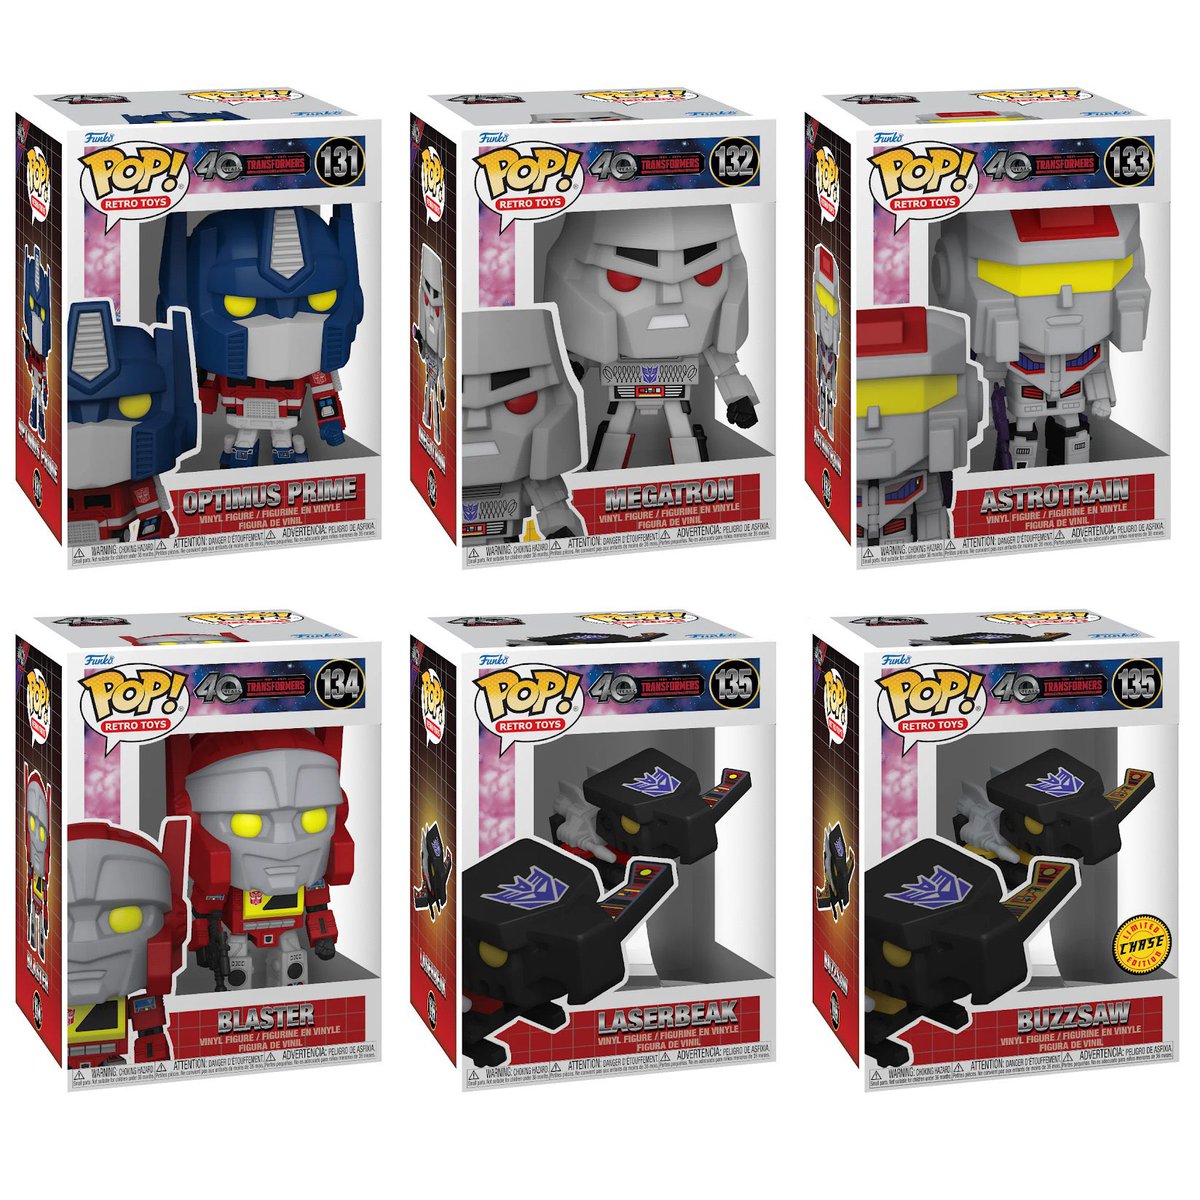 Preorder Now: Funko Pop! Retro Toys: Transformers: Generation 1 - 40th Anniversary 📦 Amazon: amzn.to/3yh0StX 🌍 Ent Earth: ee.toys/TFQMP8 * No Charge Until it Ships #Ad #Transformers #Funko #FunkoPop #FunkoPops #FunkoPopVinyl #Pop #PopVinyl #FunkoCollector